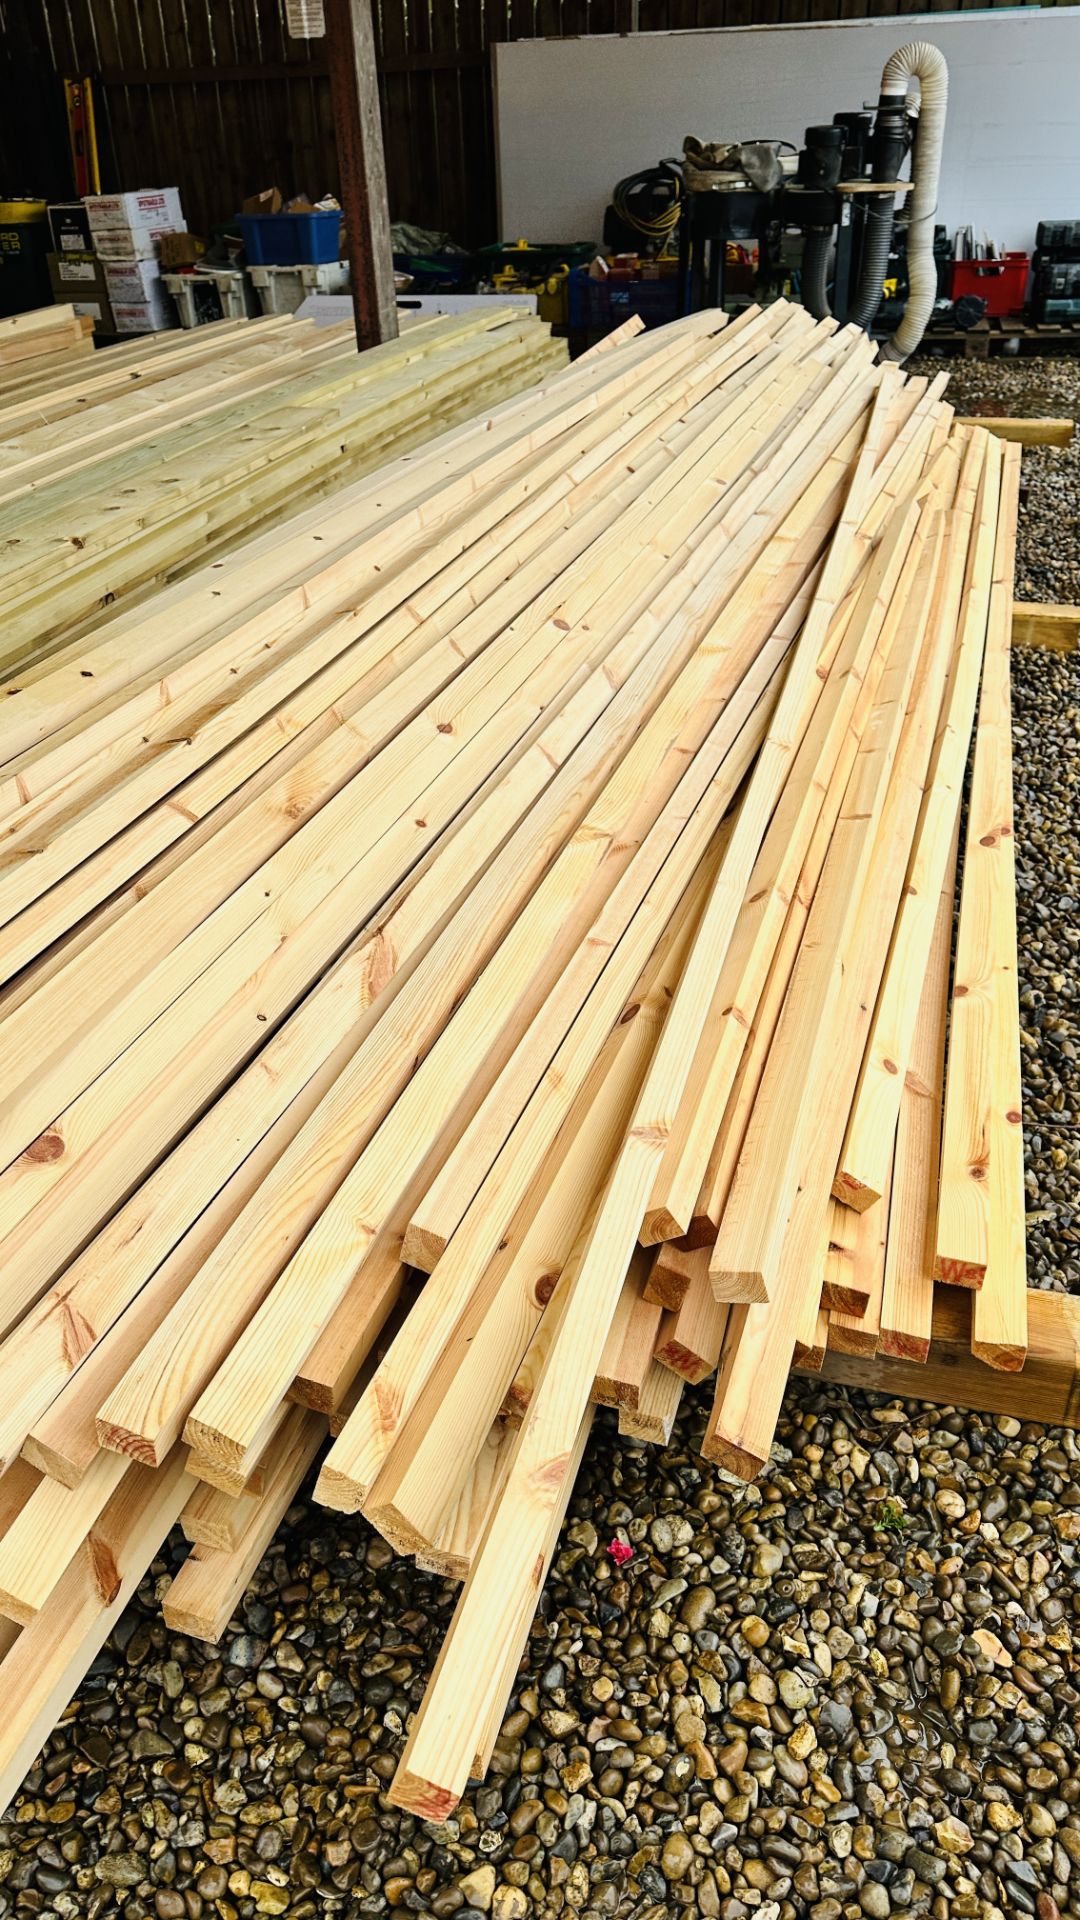 APPROX 150 LENGTHS OF 45MM X 35MM PLANED TIMBER AVERAGE LENGTH 4 METRE. - Image 5 of 5